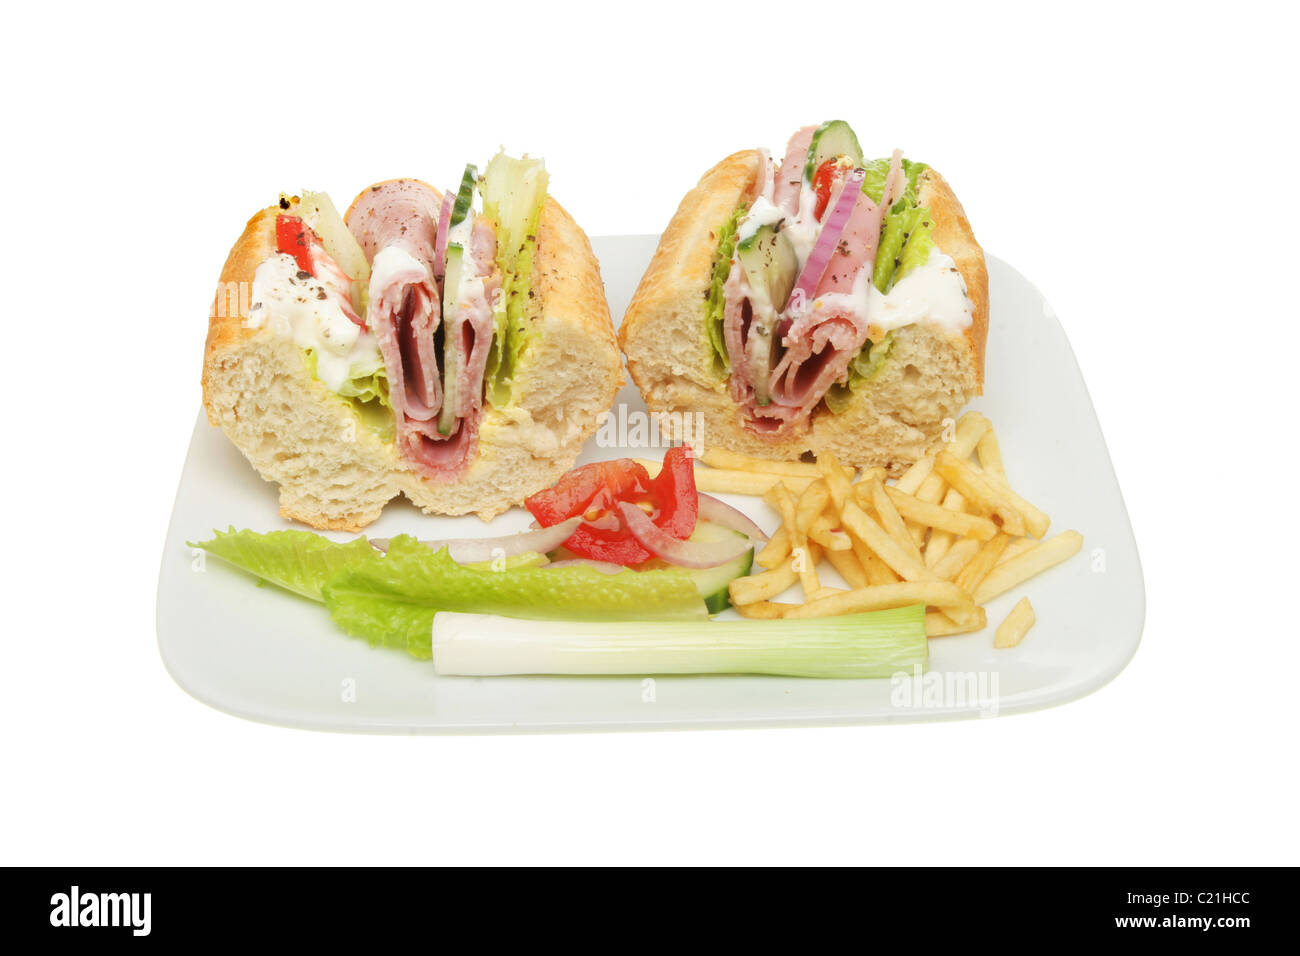 Ham salad baguette on a plate with a garnish of salad and potato chips Stock Photo